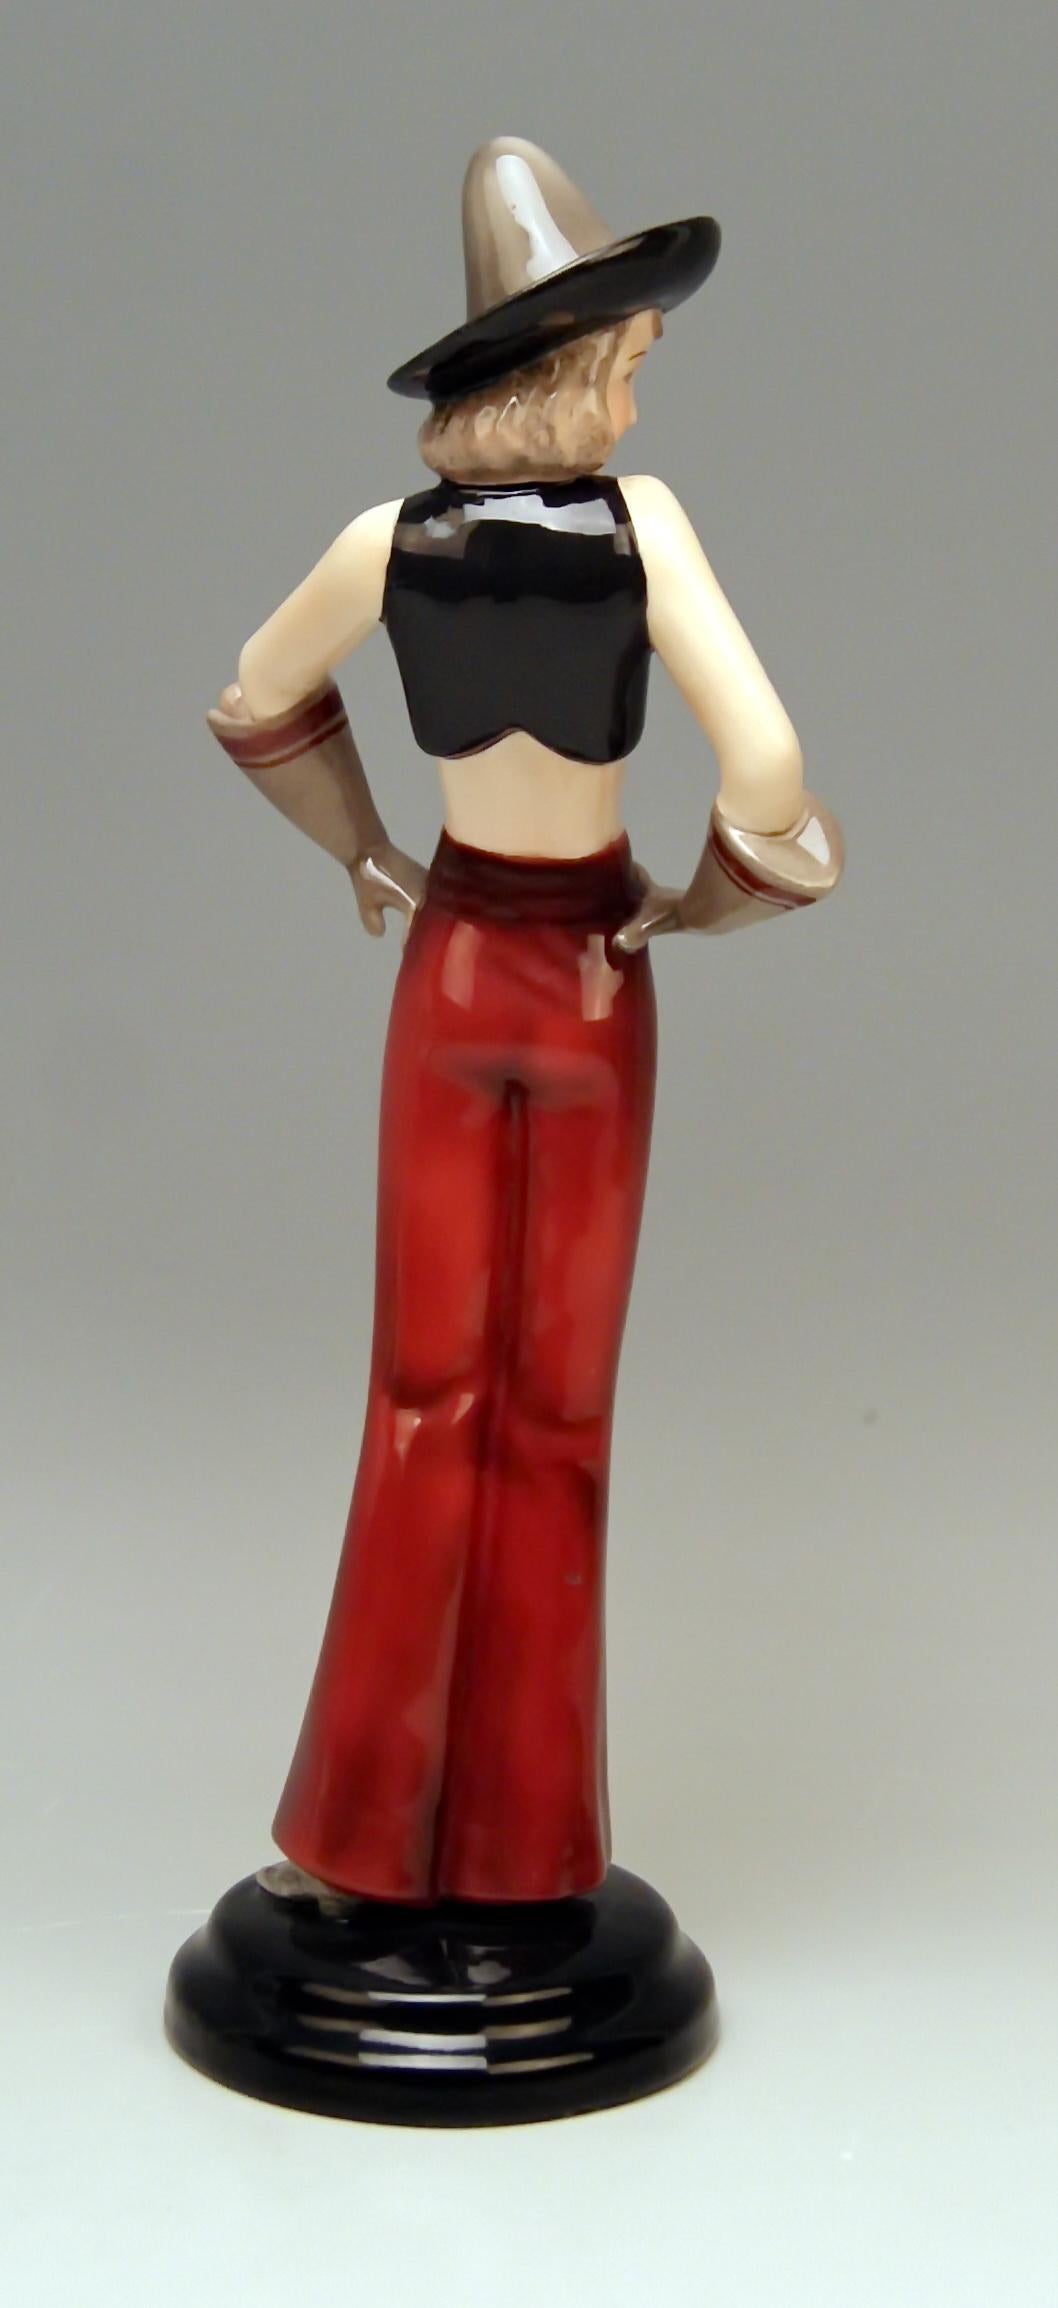 Goldscheider Vienna rare Art Deco figurine:
Girl standing upright / her head is covered with a sombrero hat.

Designed by Stefan (= Stephen) Dakon (1904 - 1992), modelled circa 1934 / made c. 1935-37 /
model number 6912 / 93 /